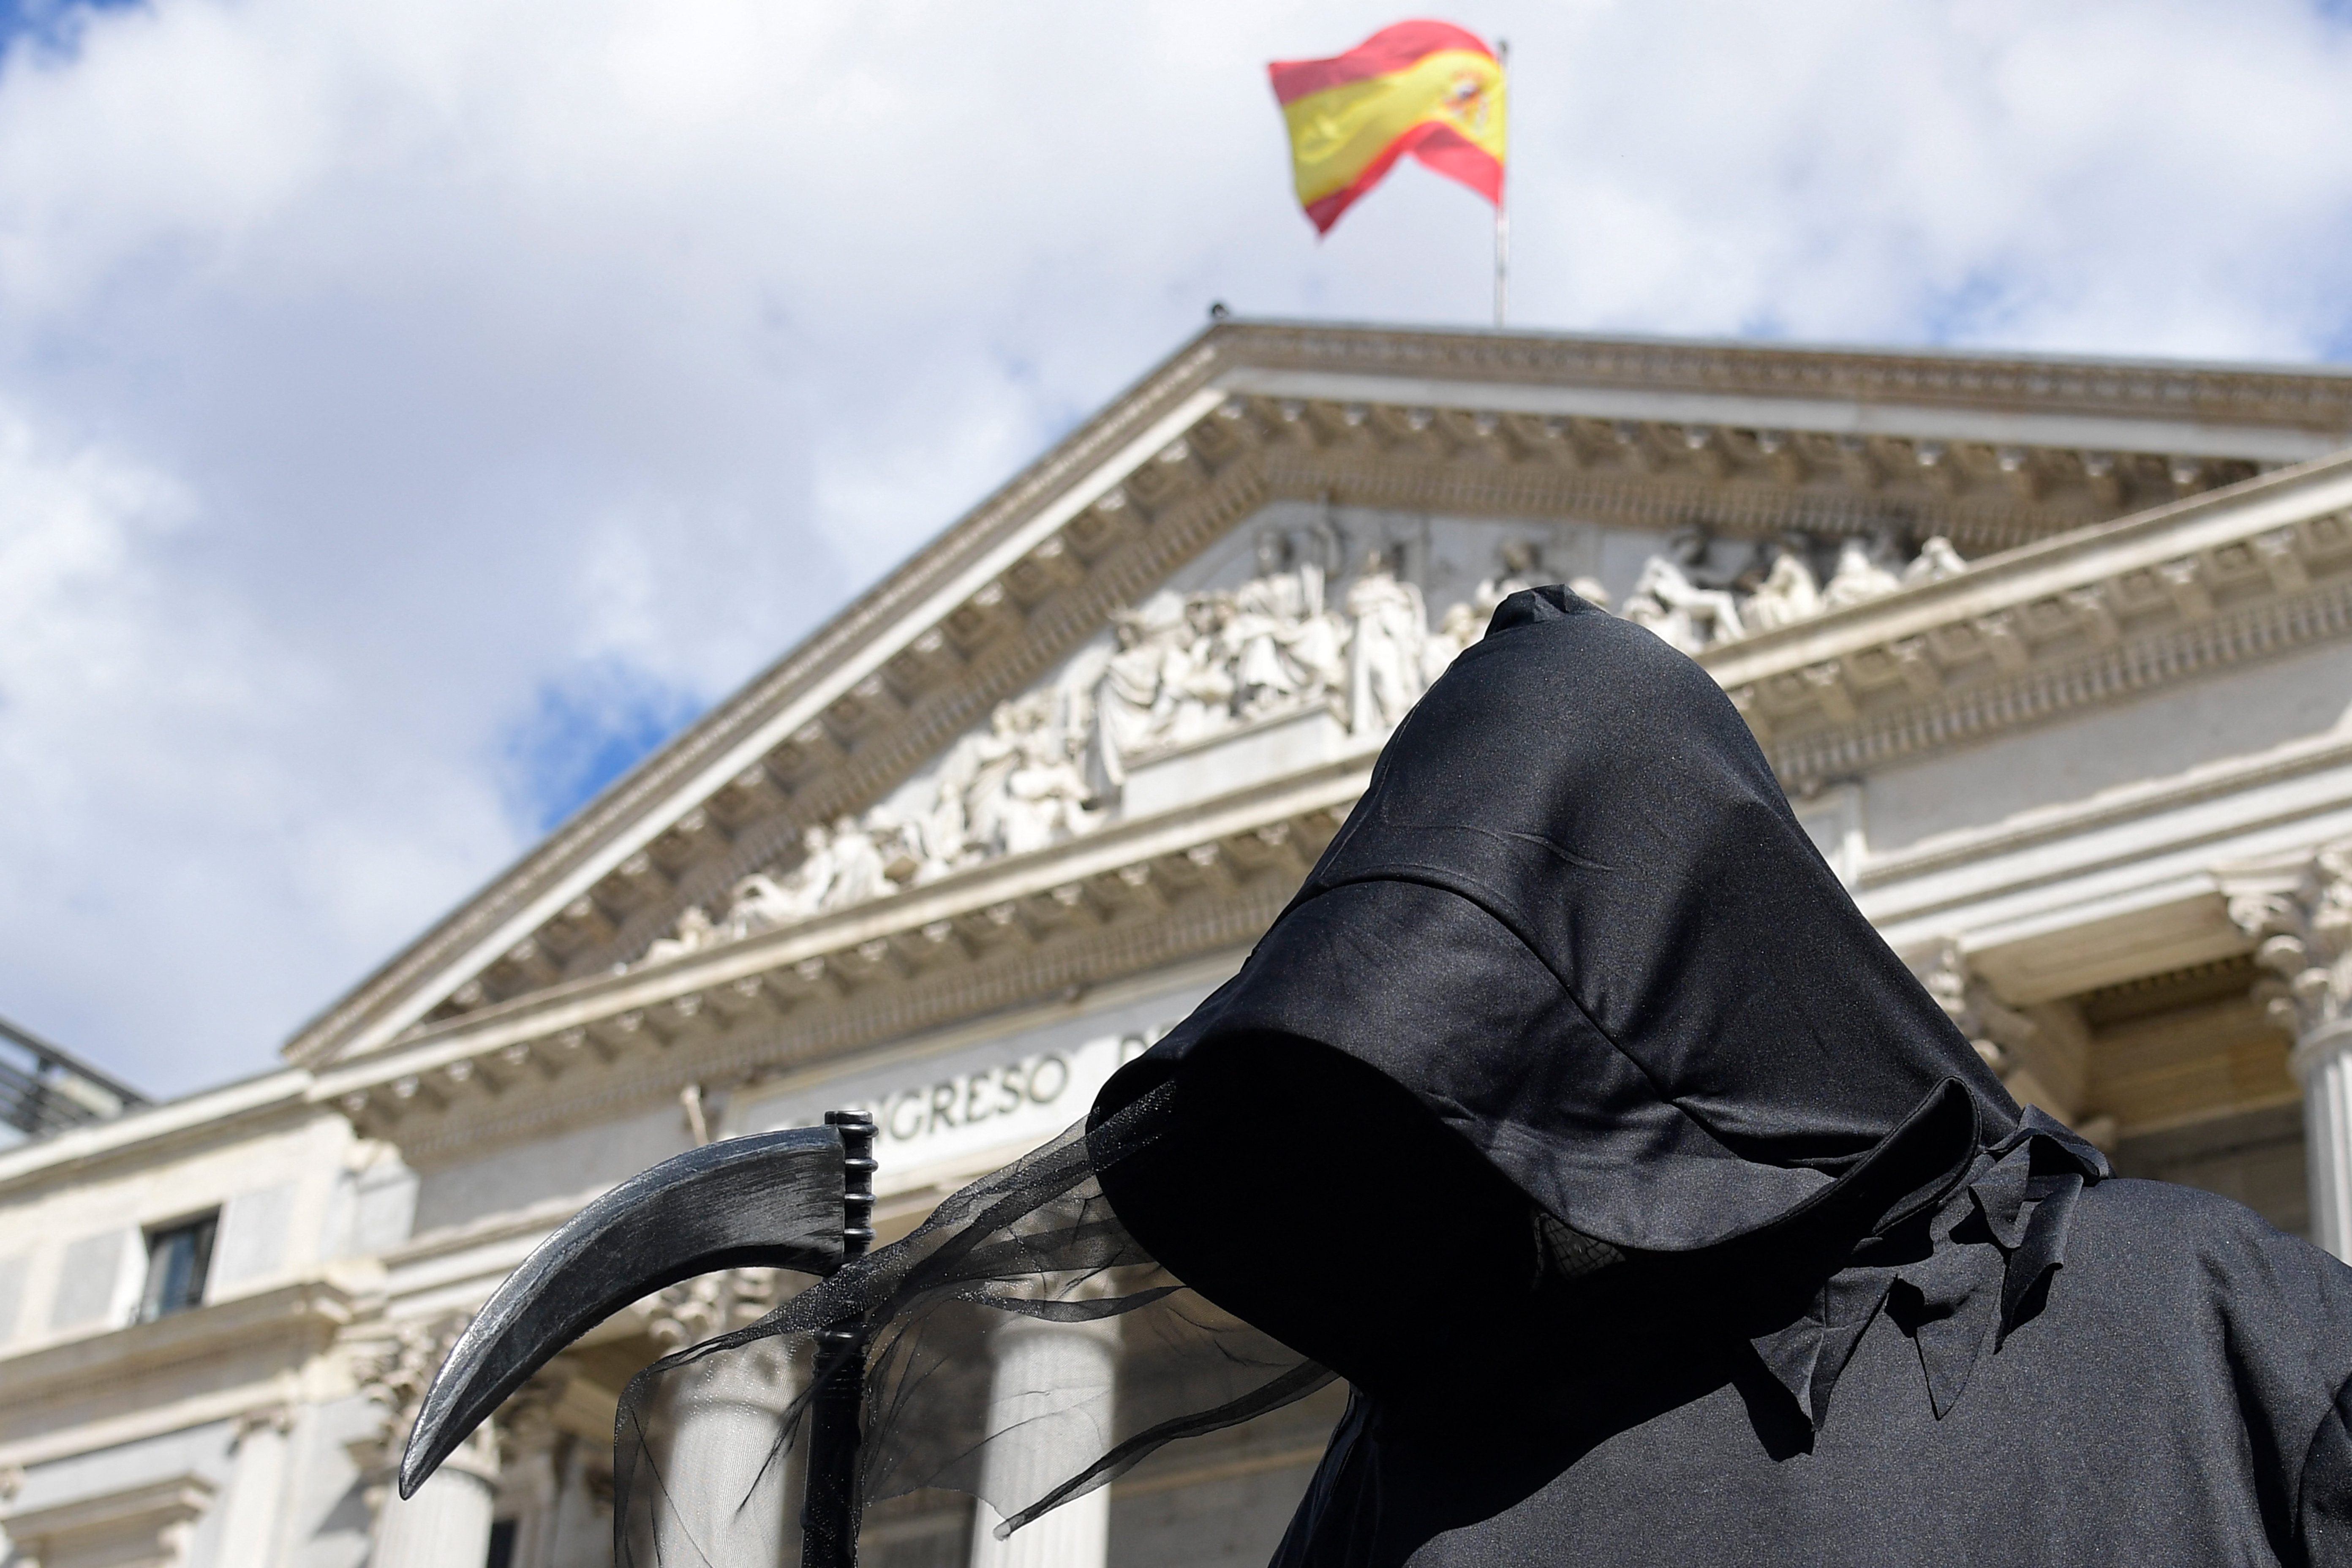 Man dressed as grim reaper protests Spain's proposed euthanasia law